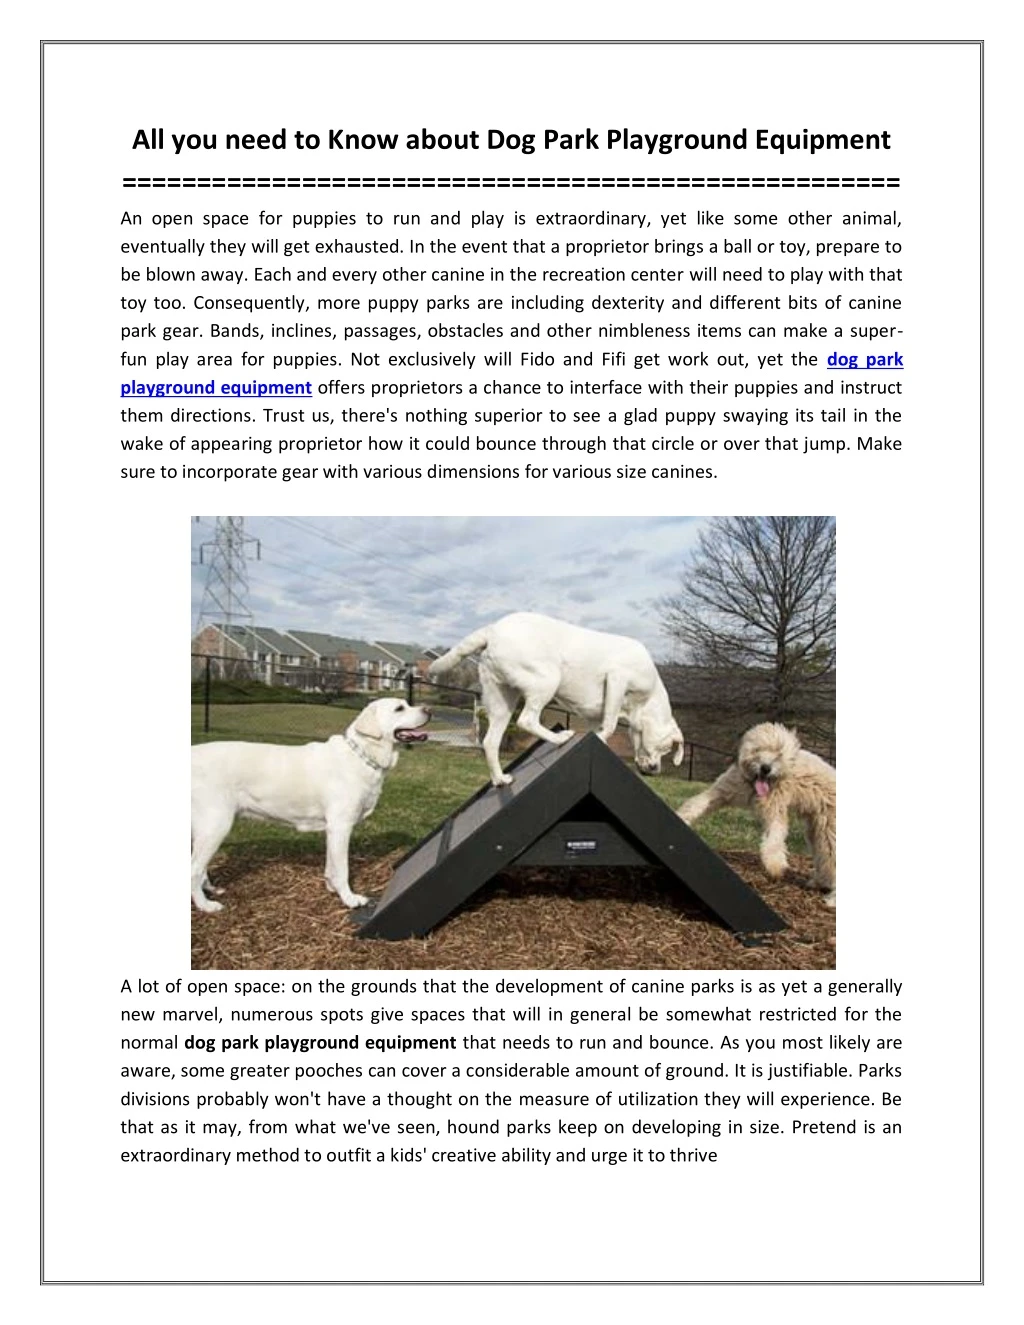 all you need to know about dog park playground